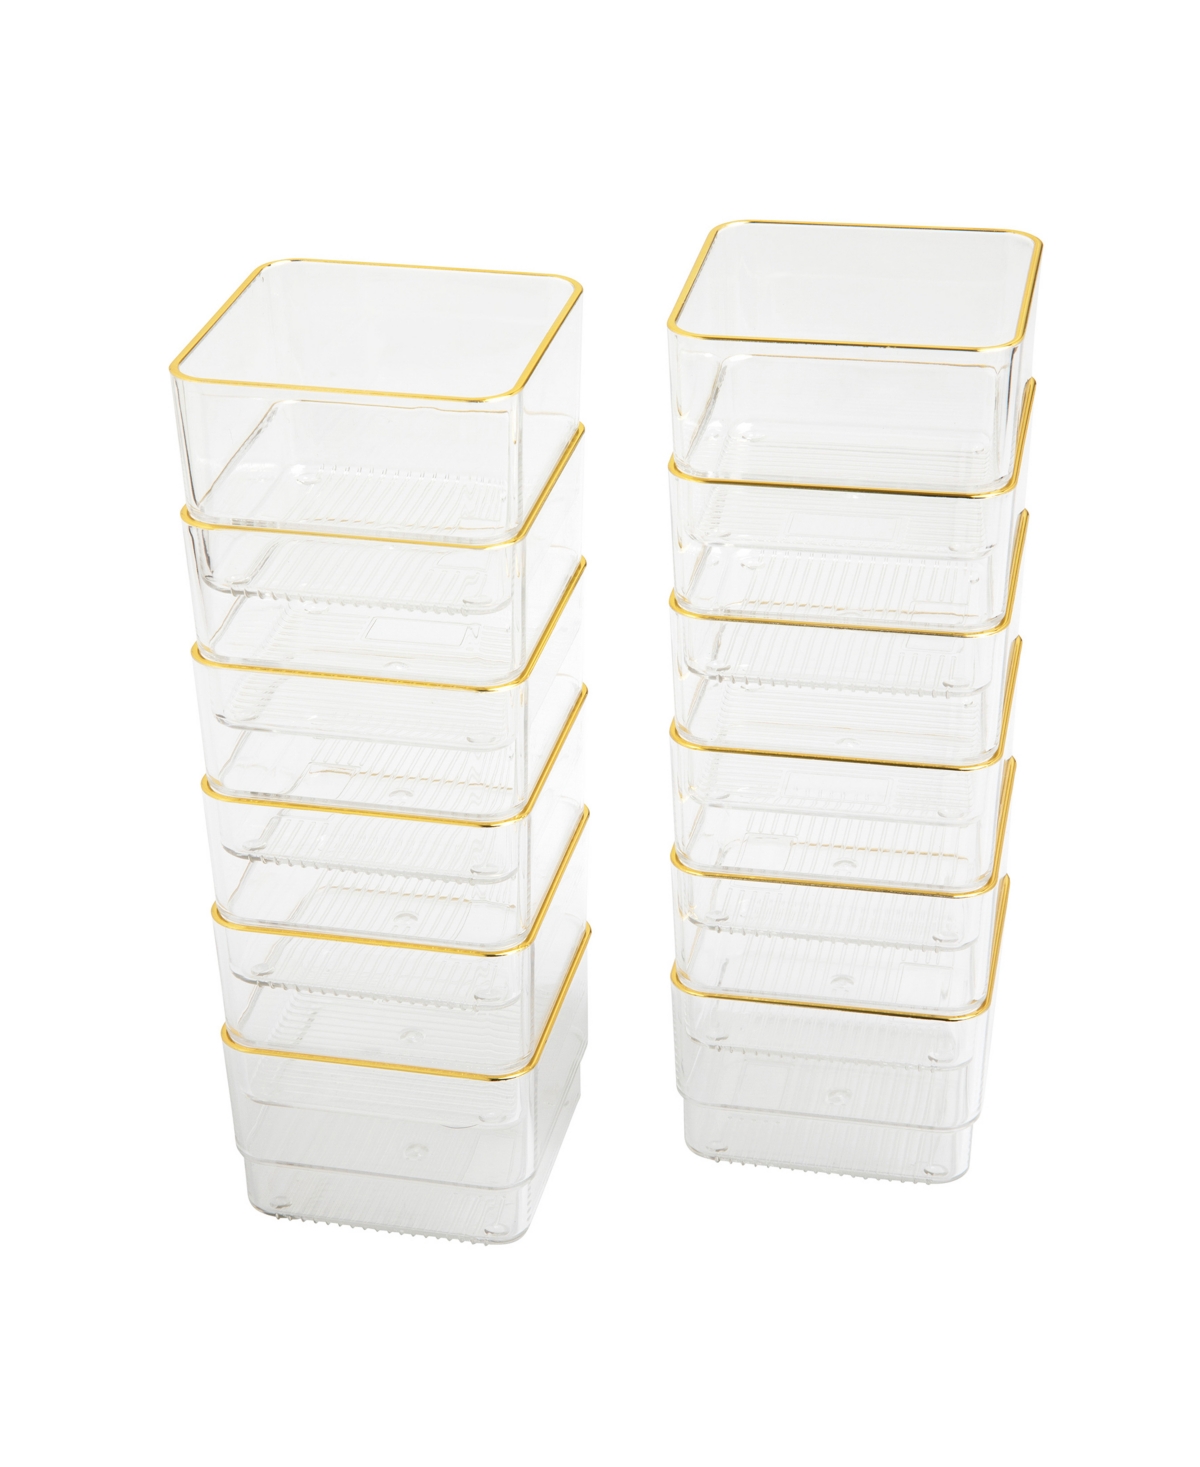 Kerry 12 Piece Plastic Stackable Office Desk Drawer Organizers Set, 3" x 3" - Clear, Gold Trim